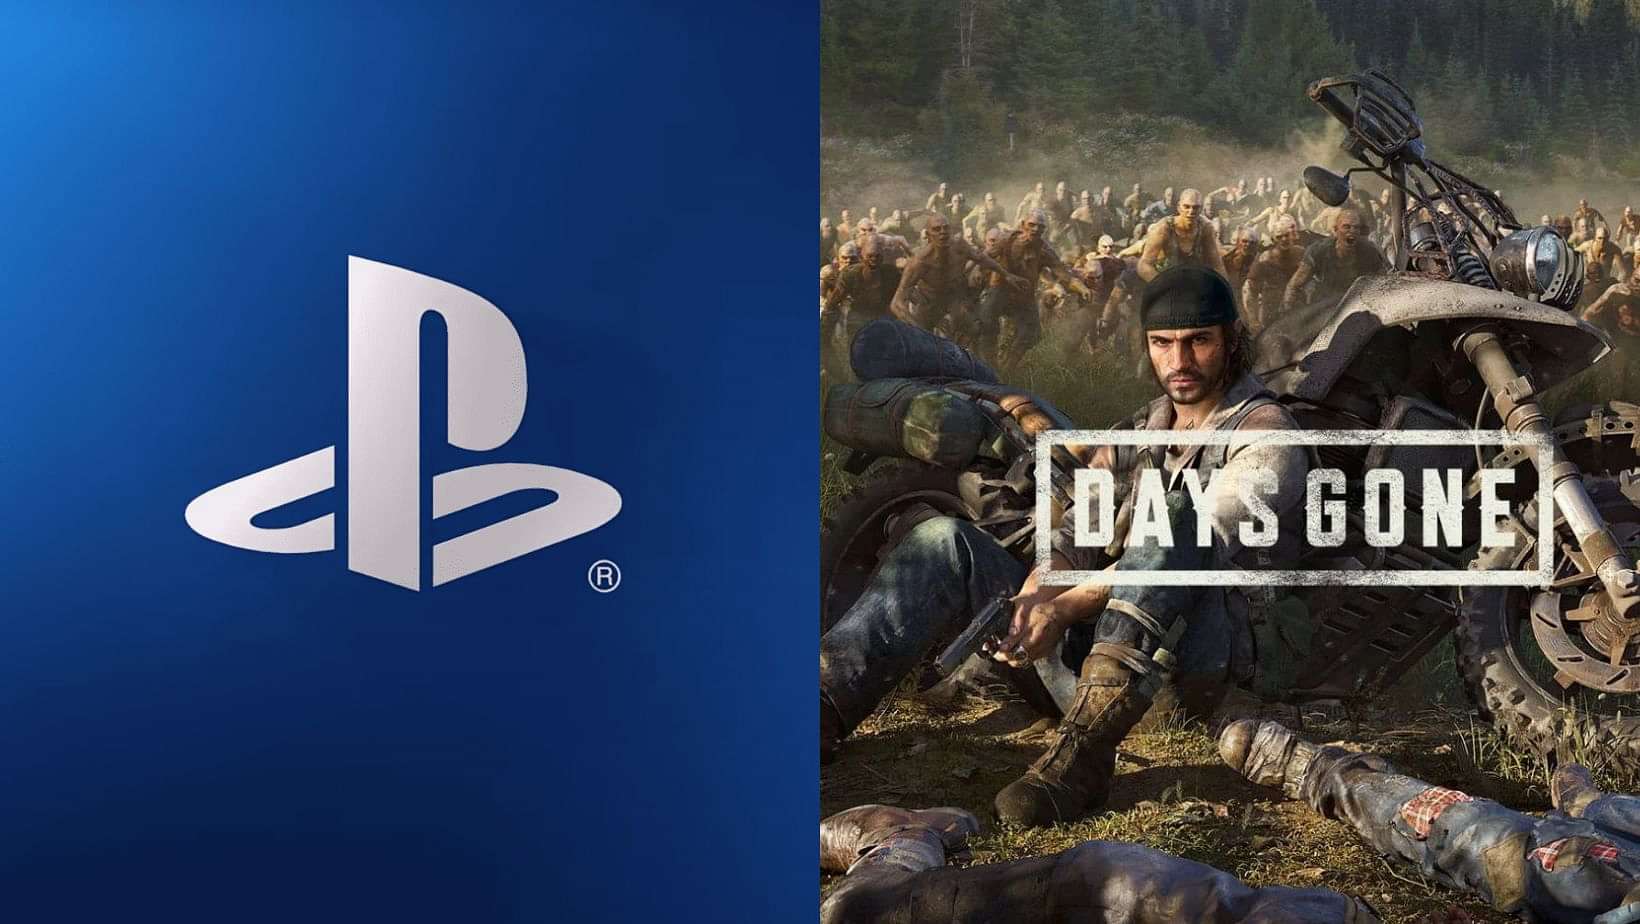 PlayStation Welcomes Its New Playmaker via Days Gone Collab - The SportsRush